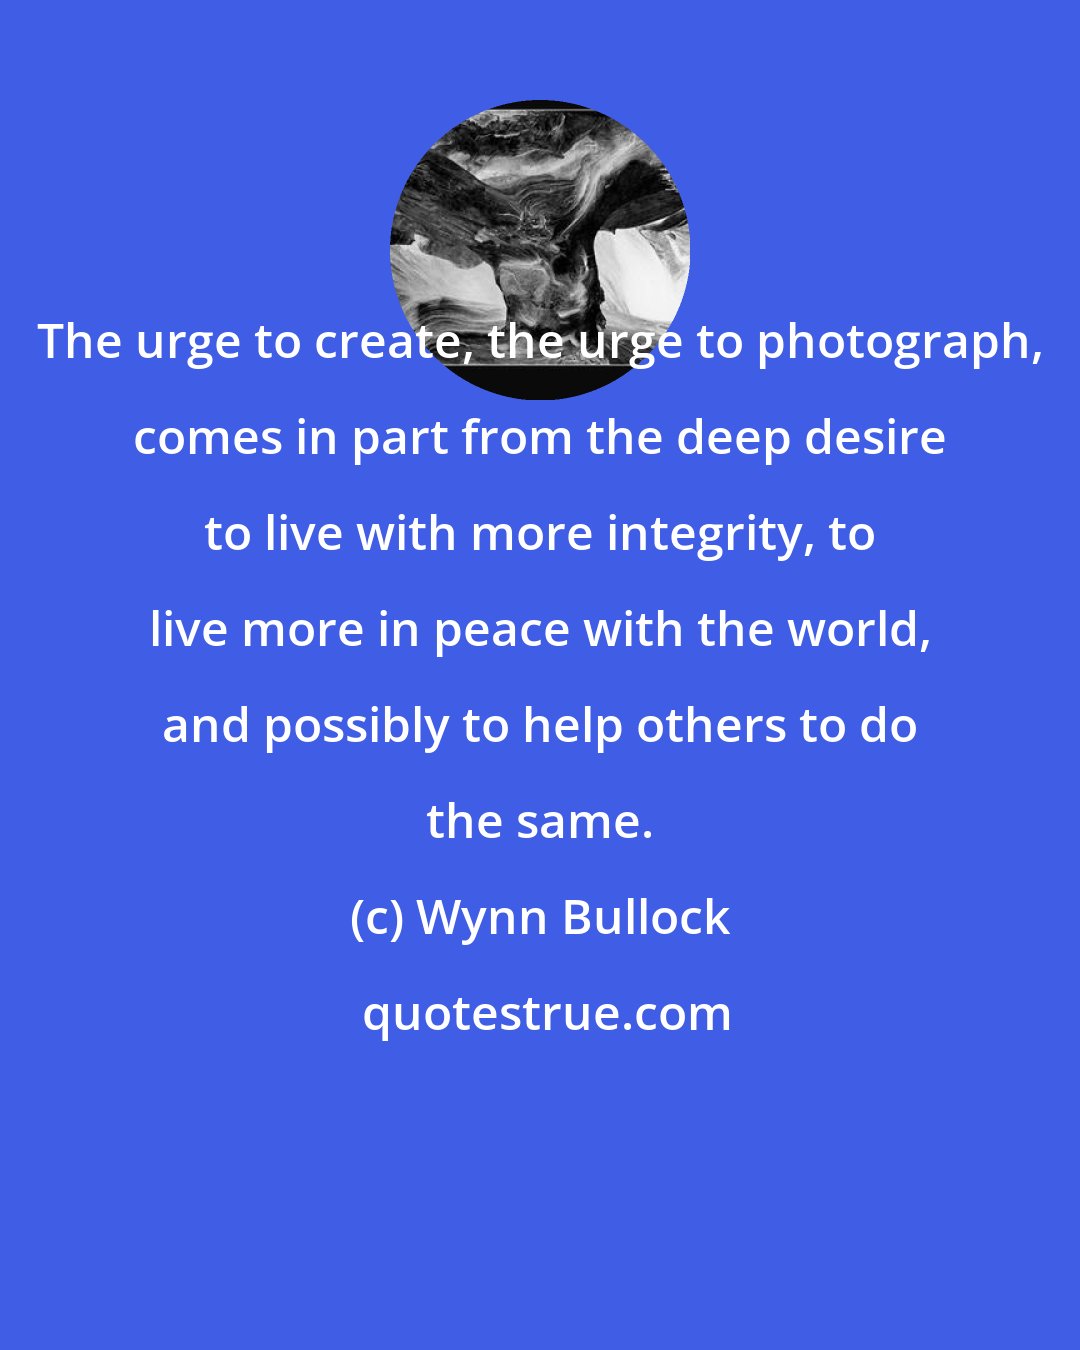 Wynn Bullock: The urge to create, the urge to photograph, comes in part from the deep desire to live with more integrity, to live more in peace with the world, and possibly to help others to do the same.